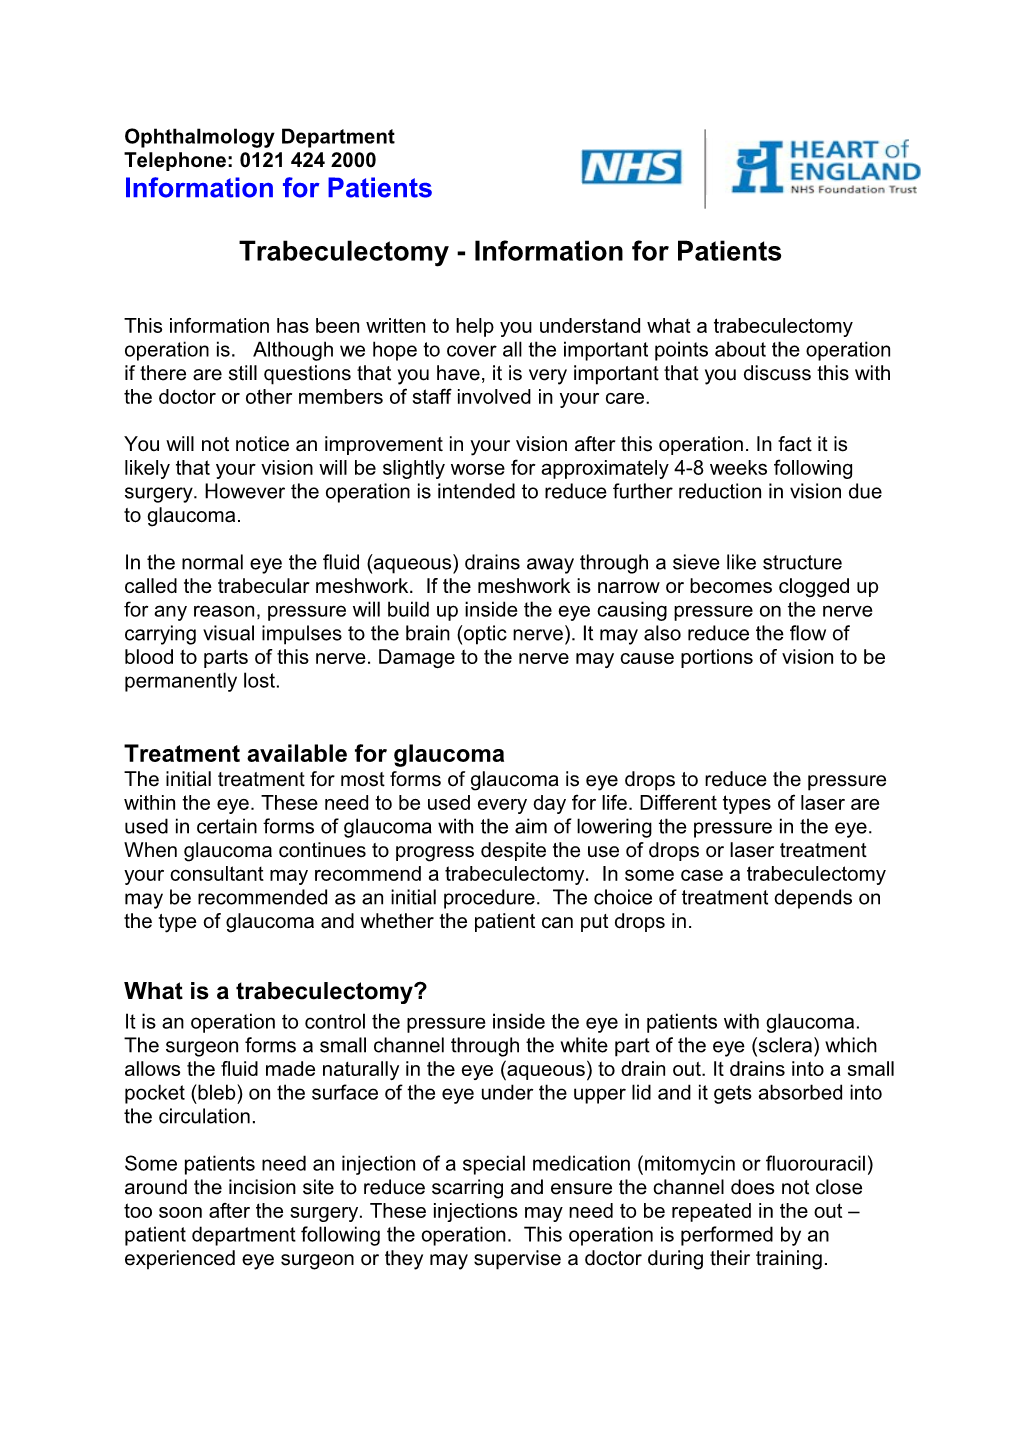 Trabeculectomy - Information for Patients